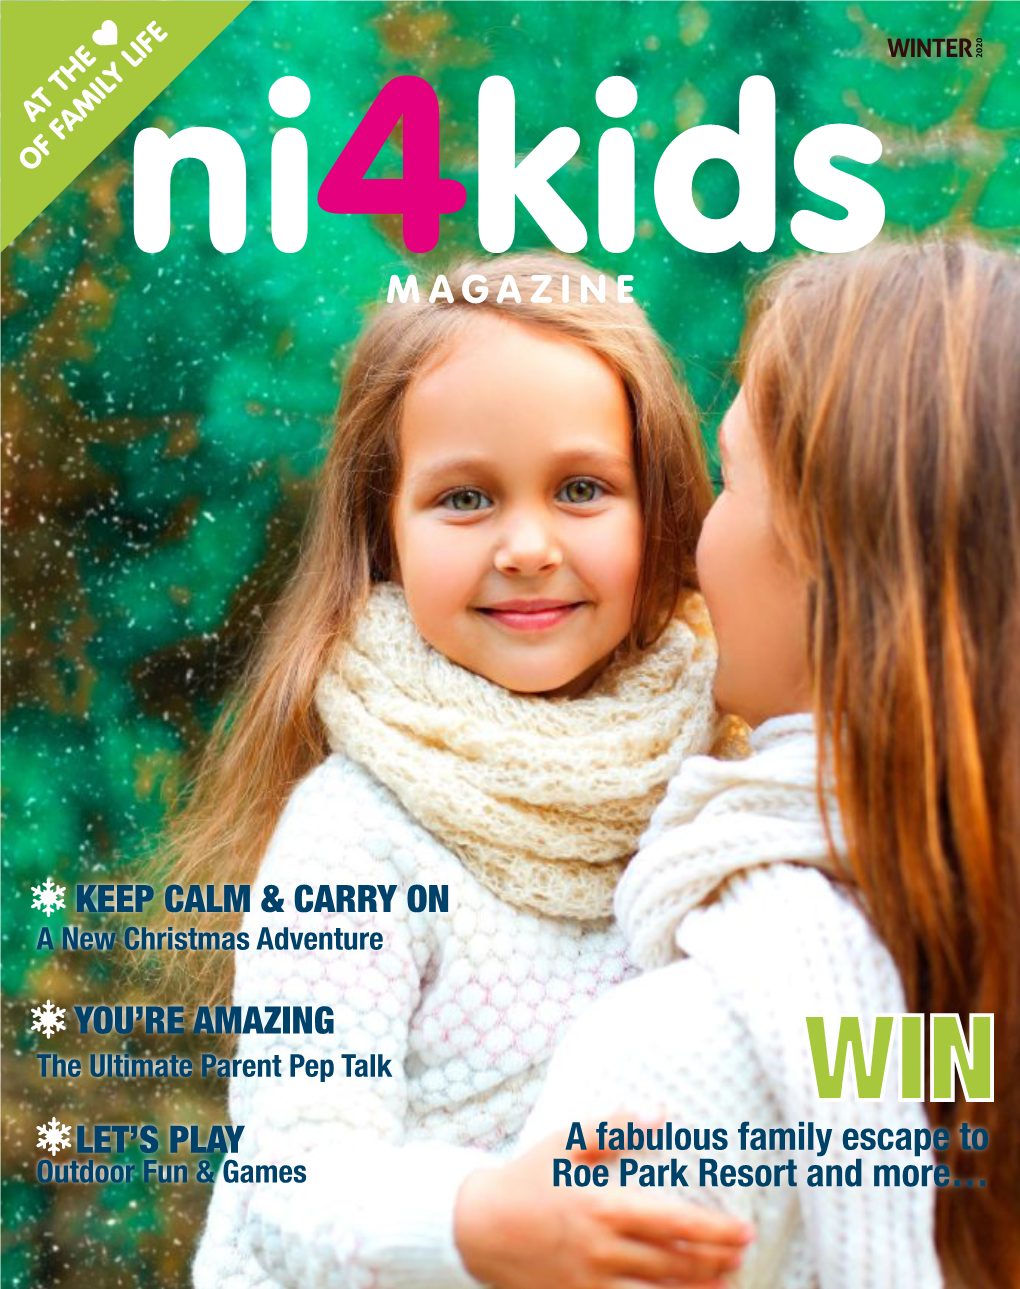 Ni4kids Magazine Is Registered – and We Are, All of Us! We Are Doing a Great Job, a Loving Home